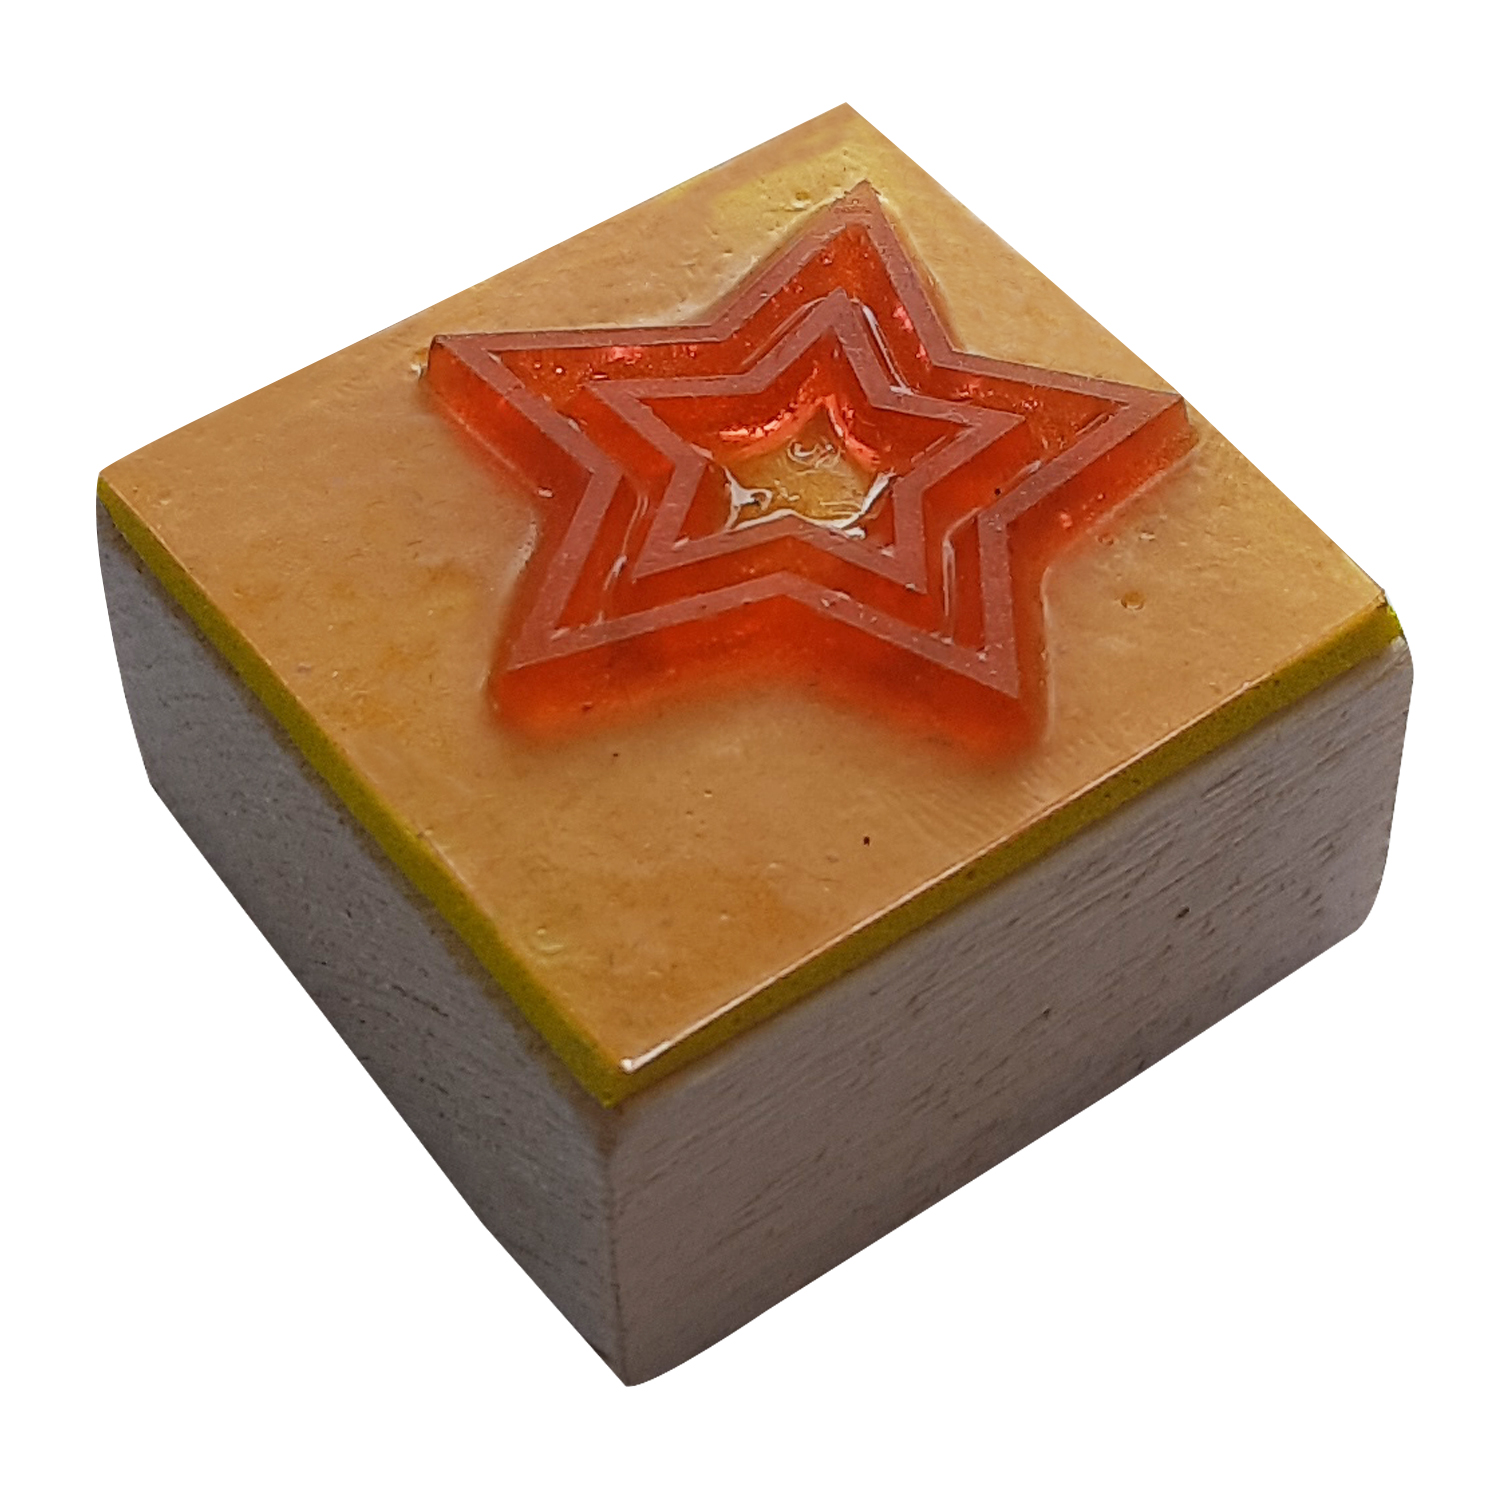 Star Rubber Stamp